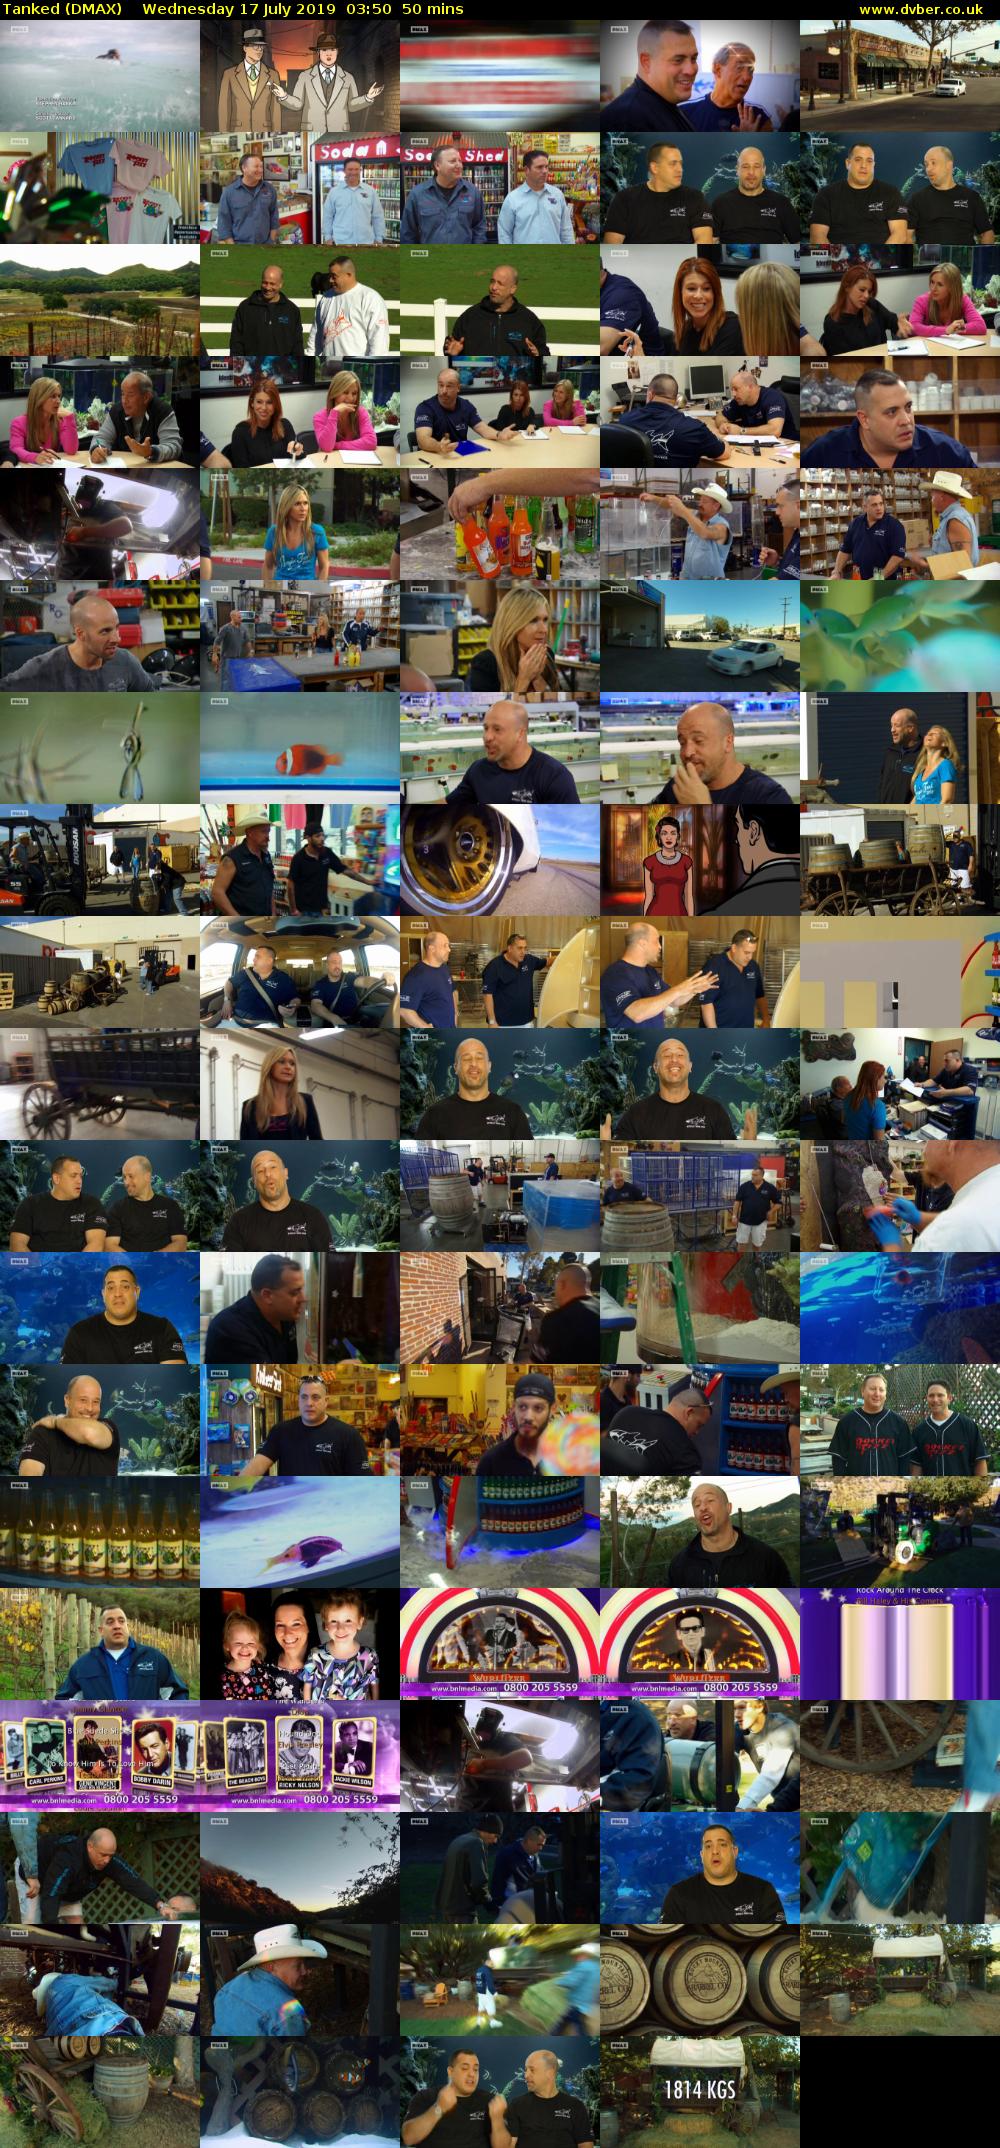 Tanked (DMAX) Wednesday 17 July 2019 03:50 - 04:40